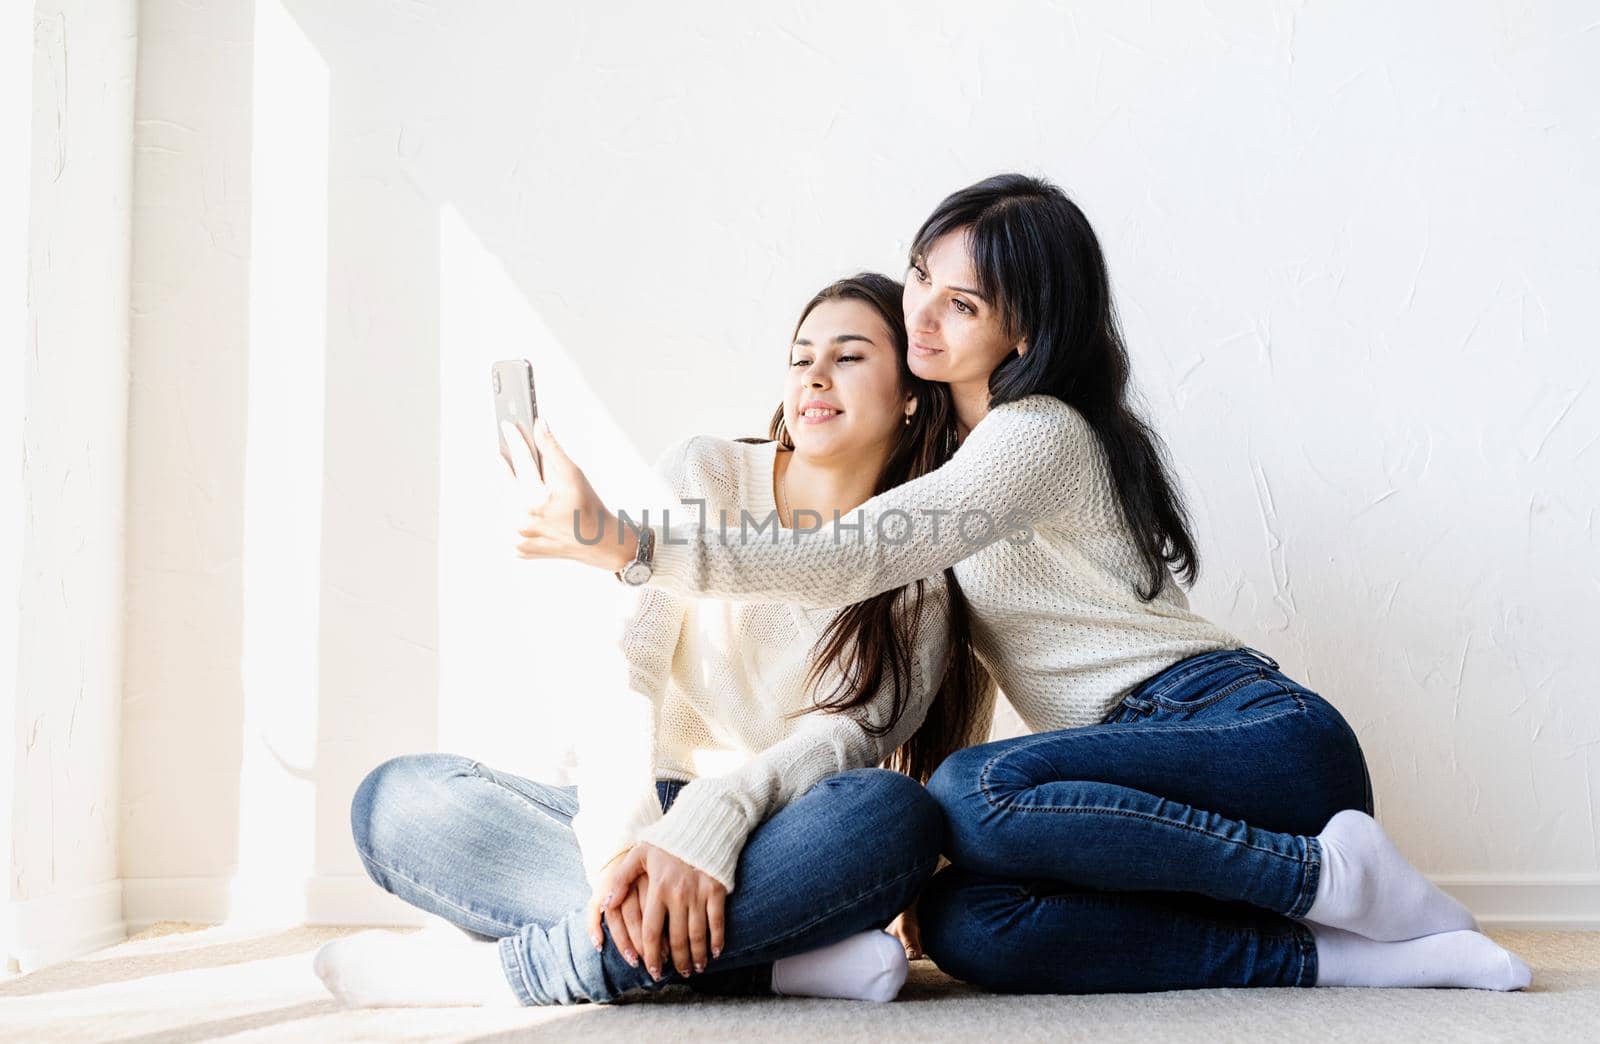 Two beautiful women taking selfie on mobile phone making funny faces by Desperada